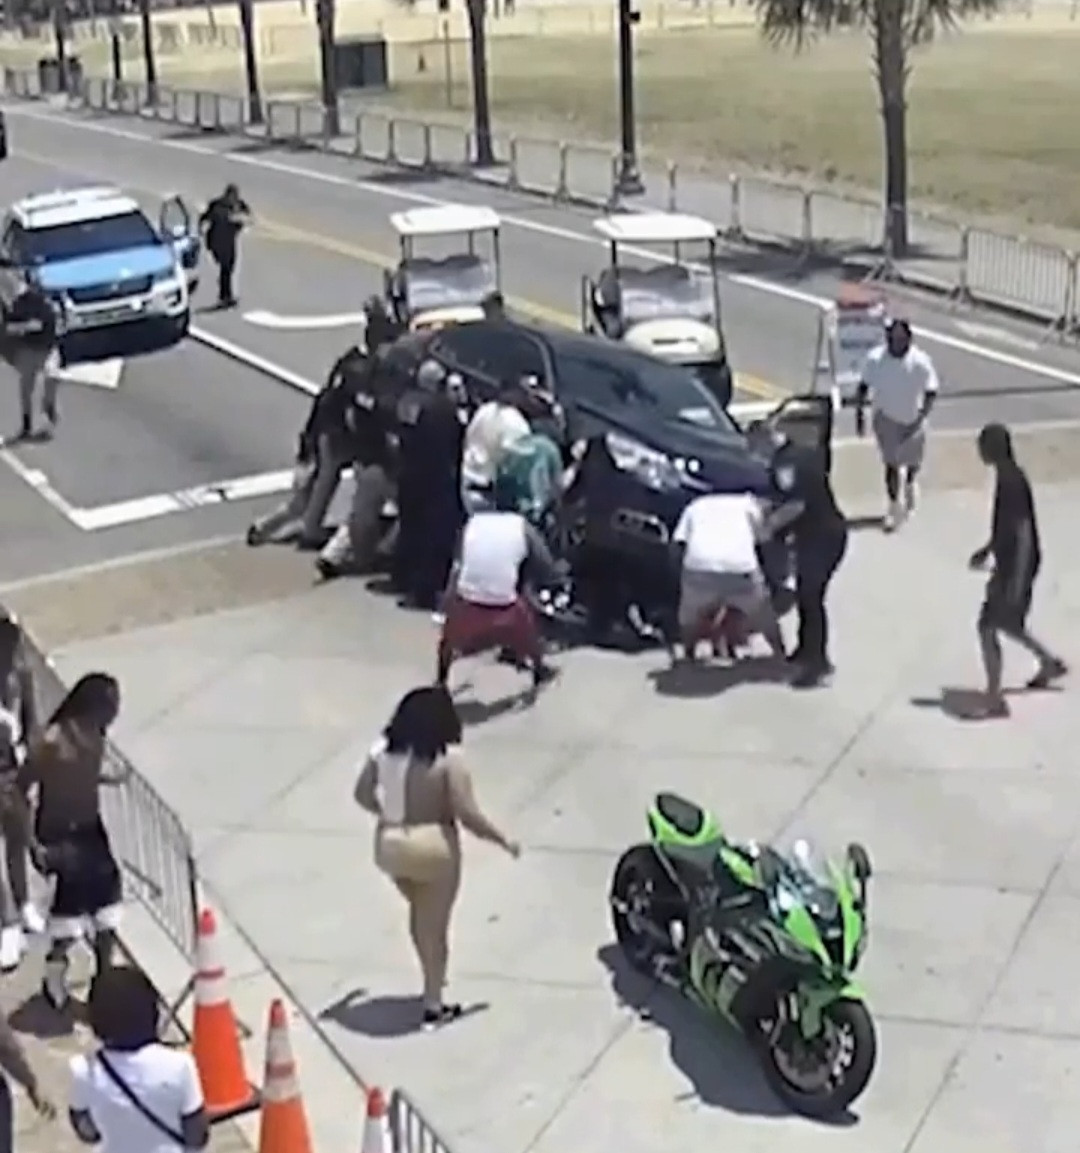 Passersby lift car to save trapped motorcyclist following accident